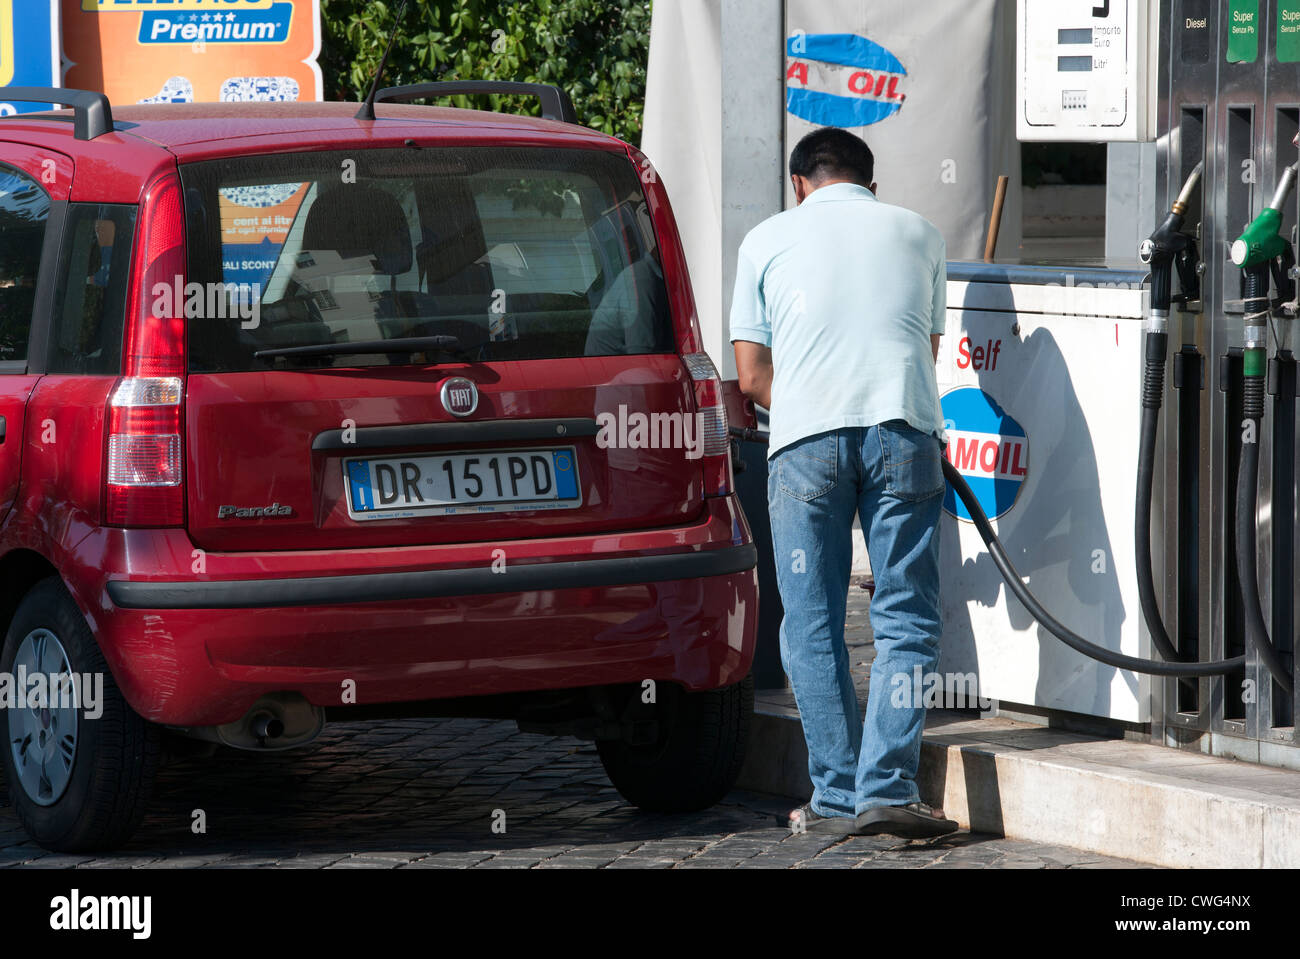 Italian male filling car with diesel fuel, City Centre, Rome, Italy. Stock Photo